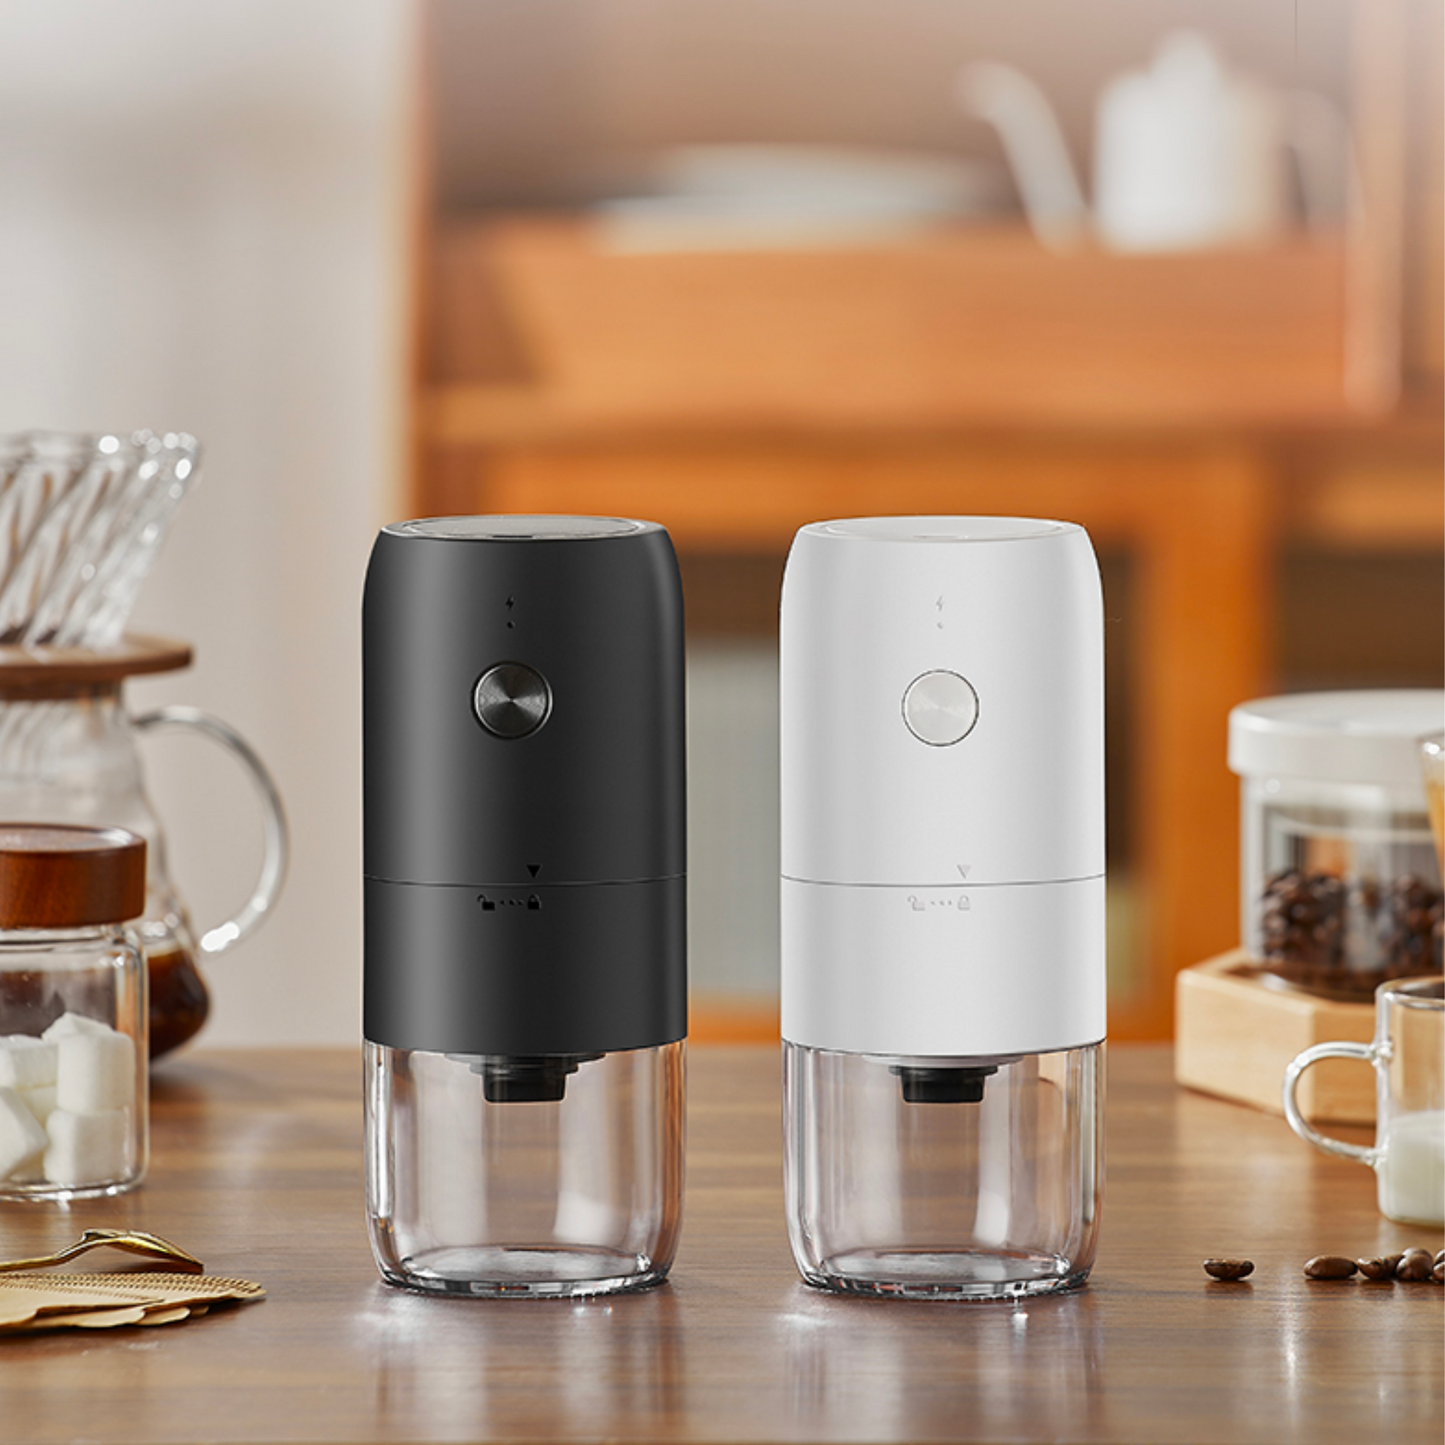 Portable Electric Coffee Grinder with USB-C port charging